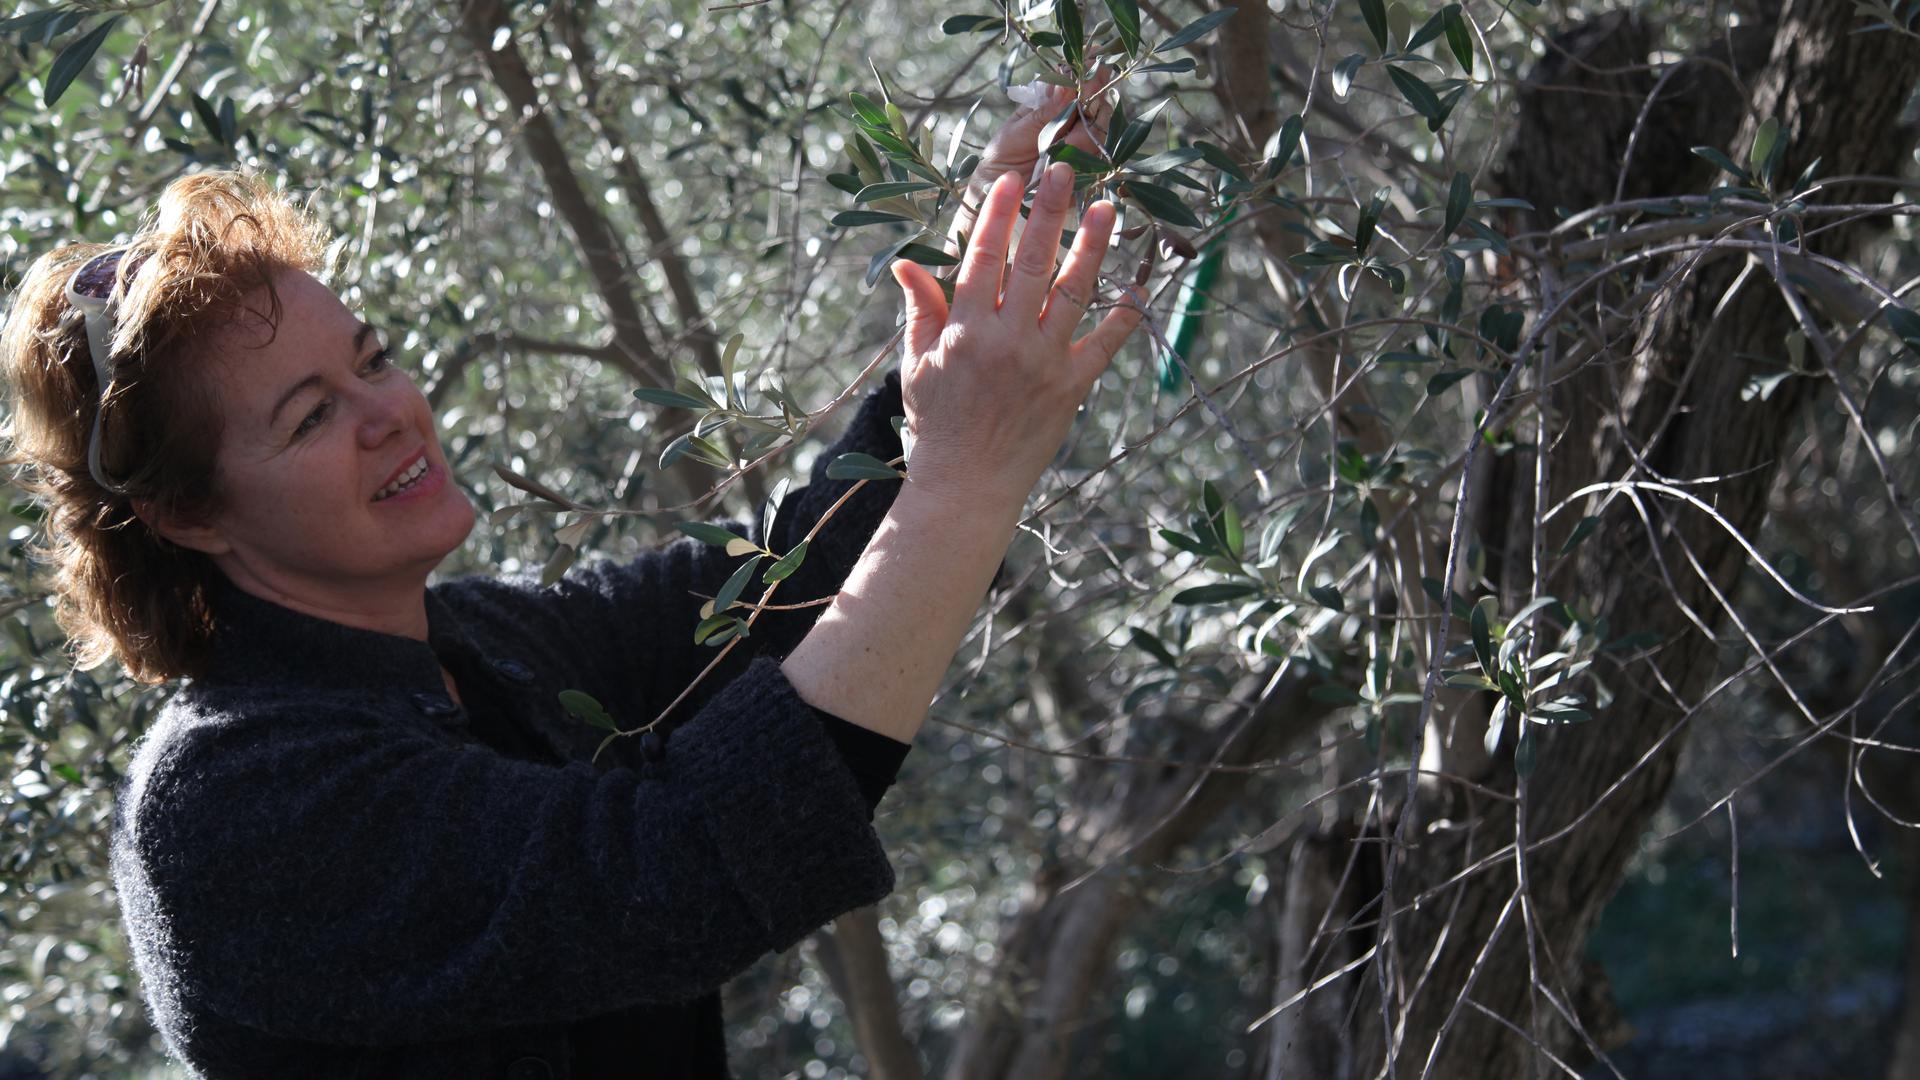 Myrta Kalampoka says investing in her olive trees saved her family from the Greek economic crisis. Now she hopes their olive oil can rescue them from an ongoing drop in tourism to Lesbos. 